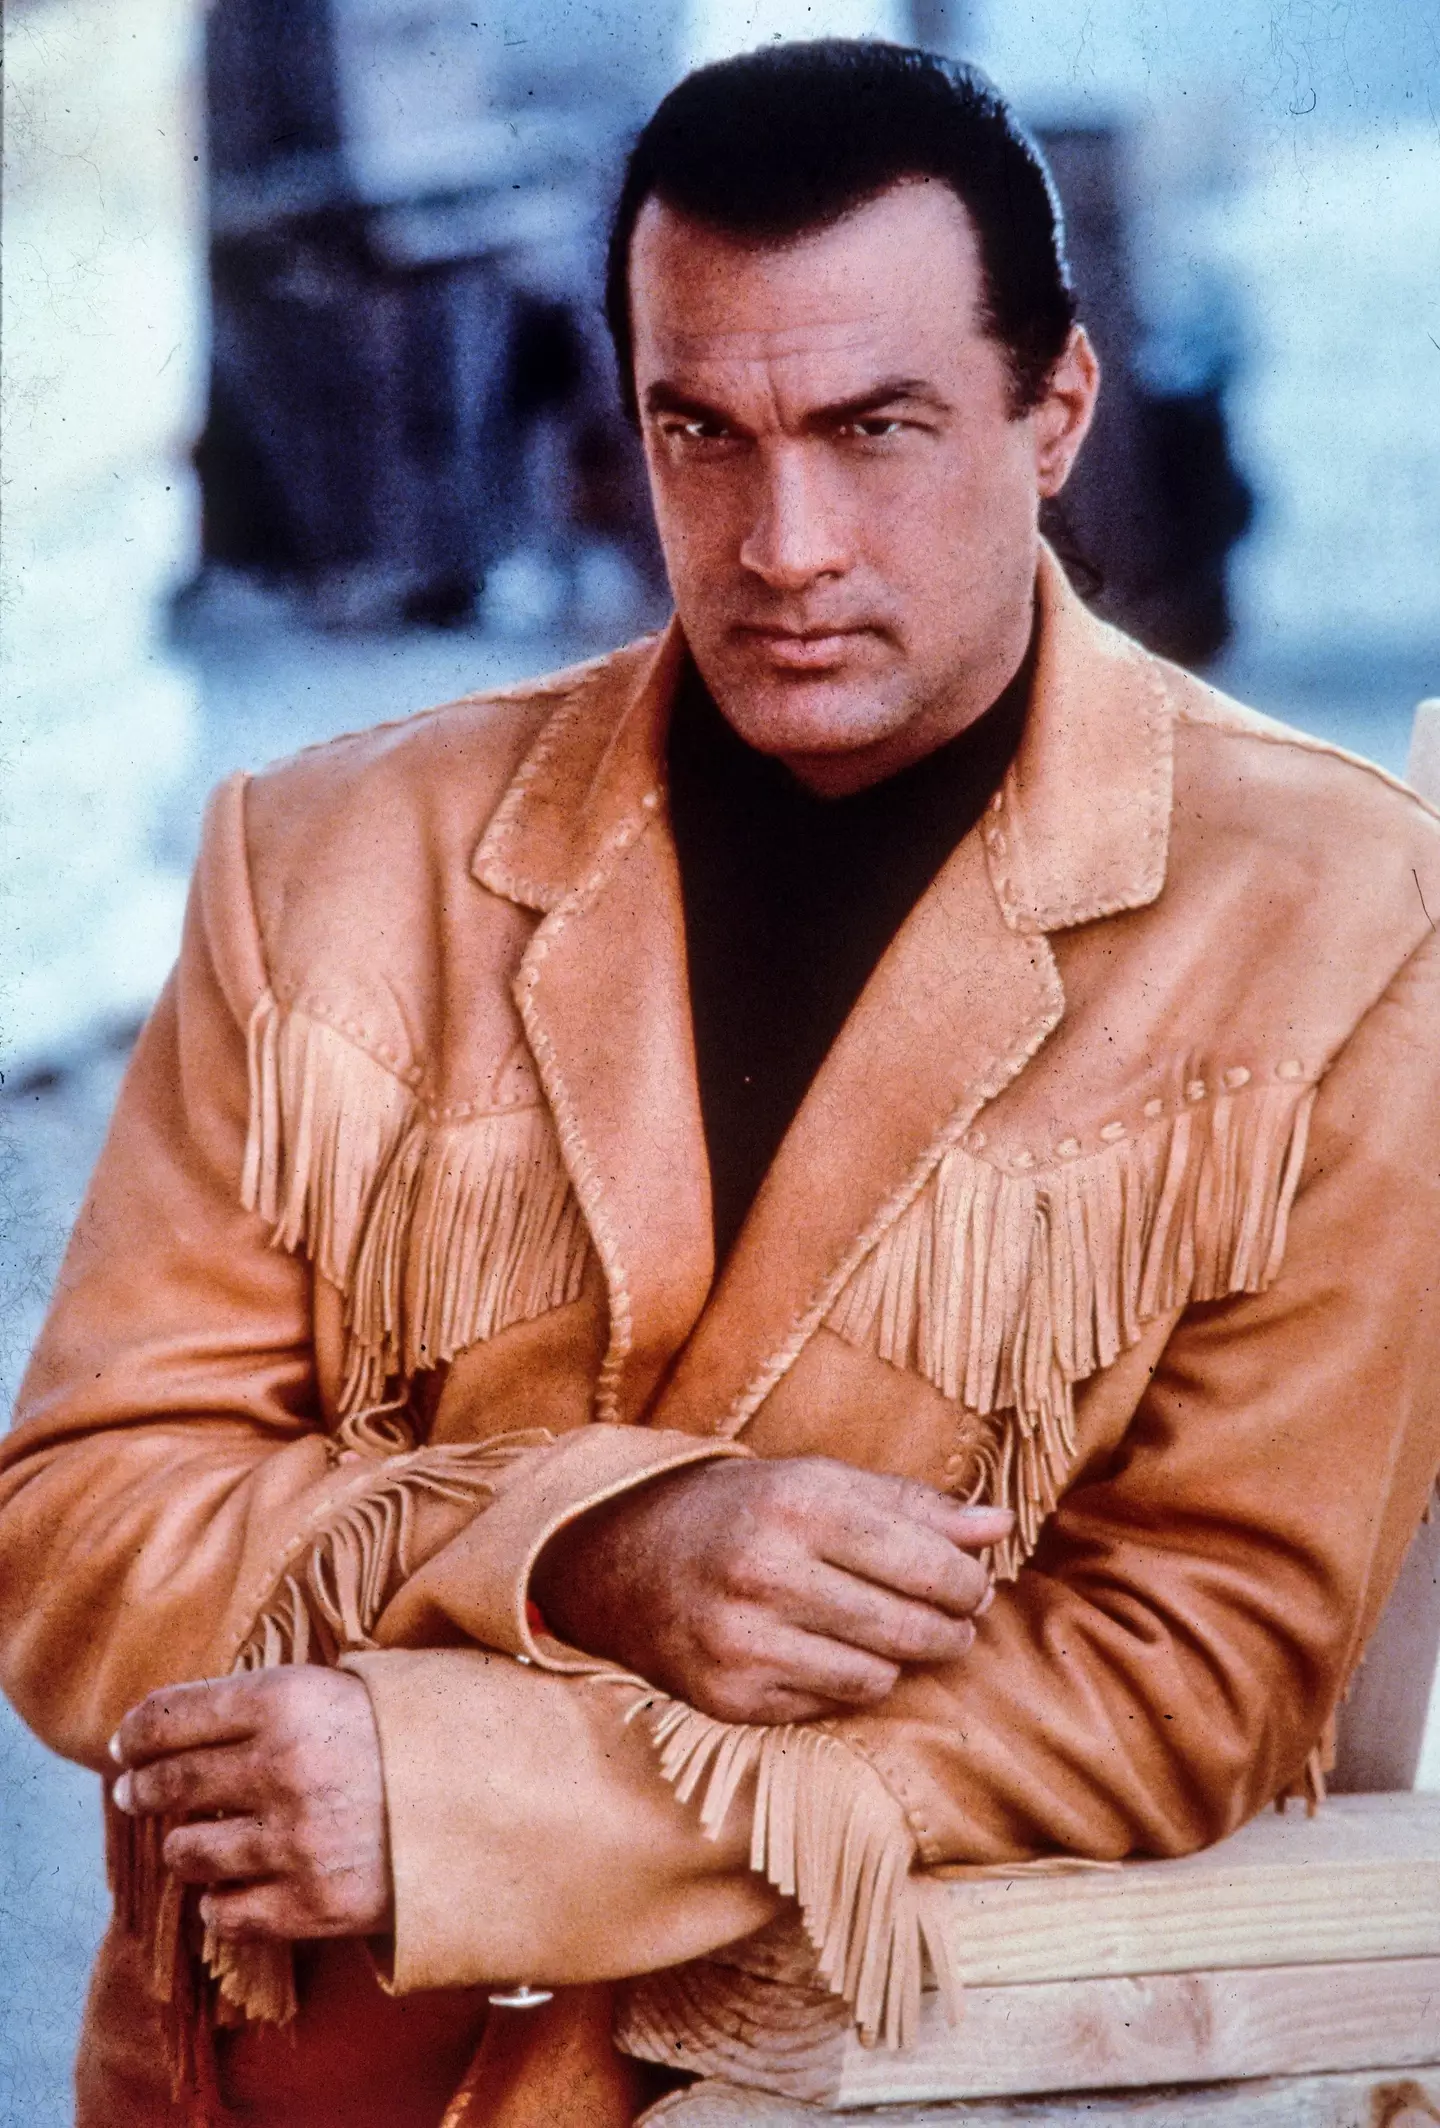 Van Damme offered to meet Seagal outside.